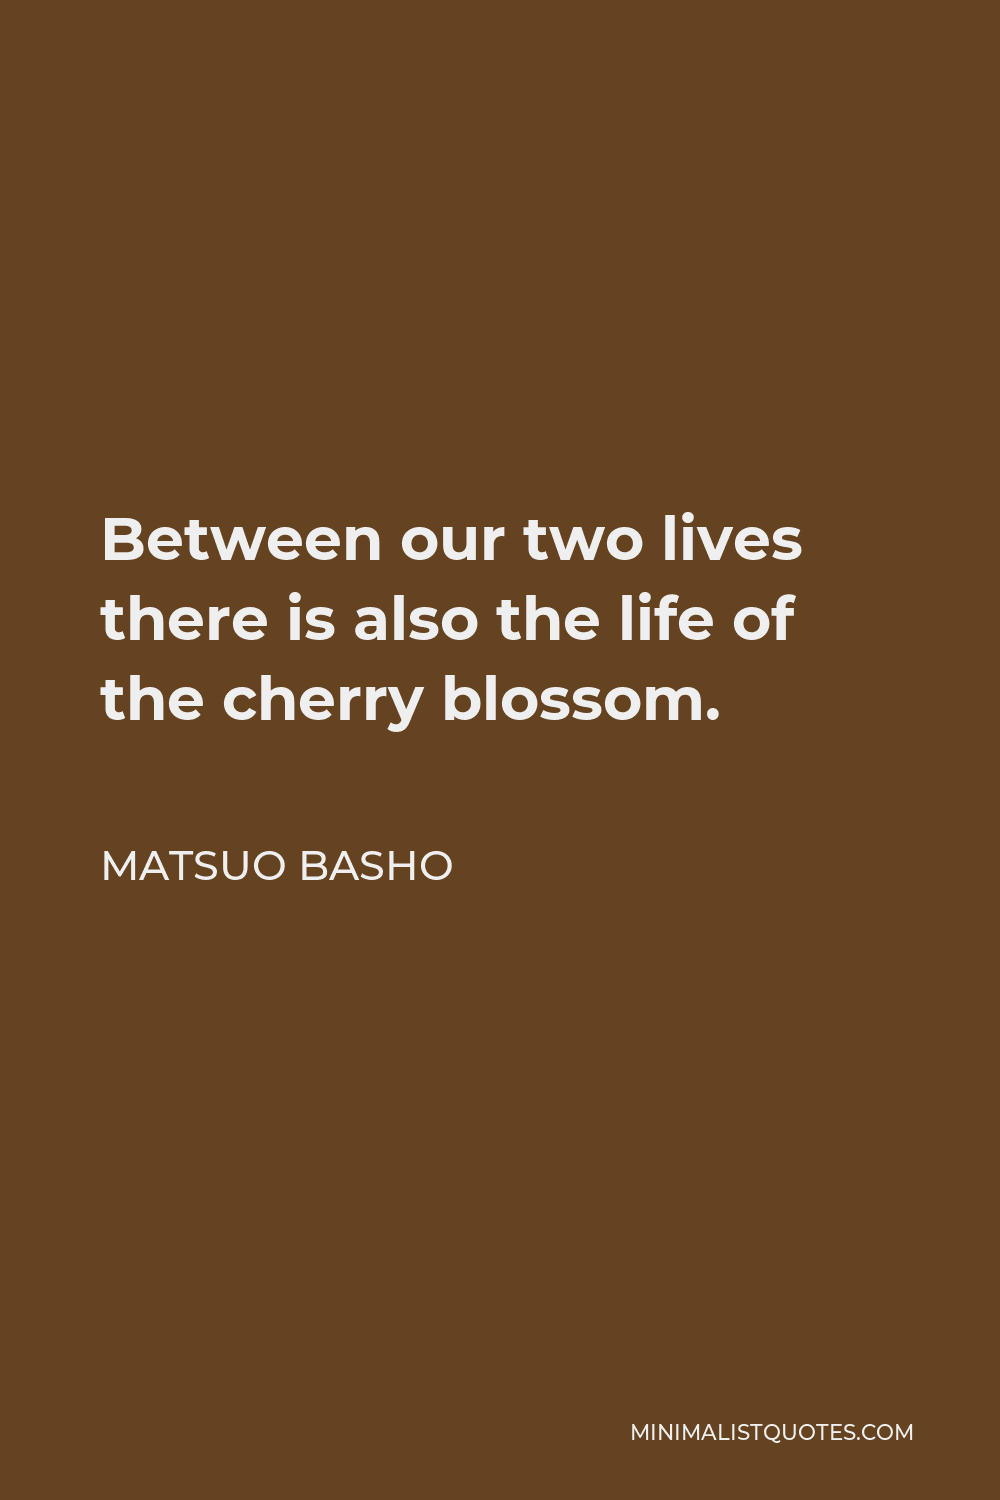 Matsuo Basho Quote - Between our two lives there is also the life of the cherry blossom.